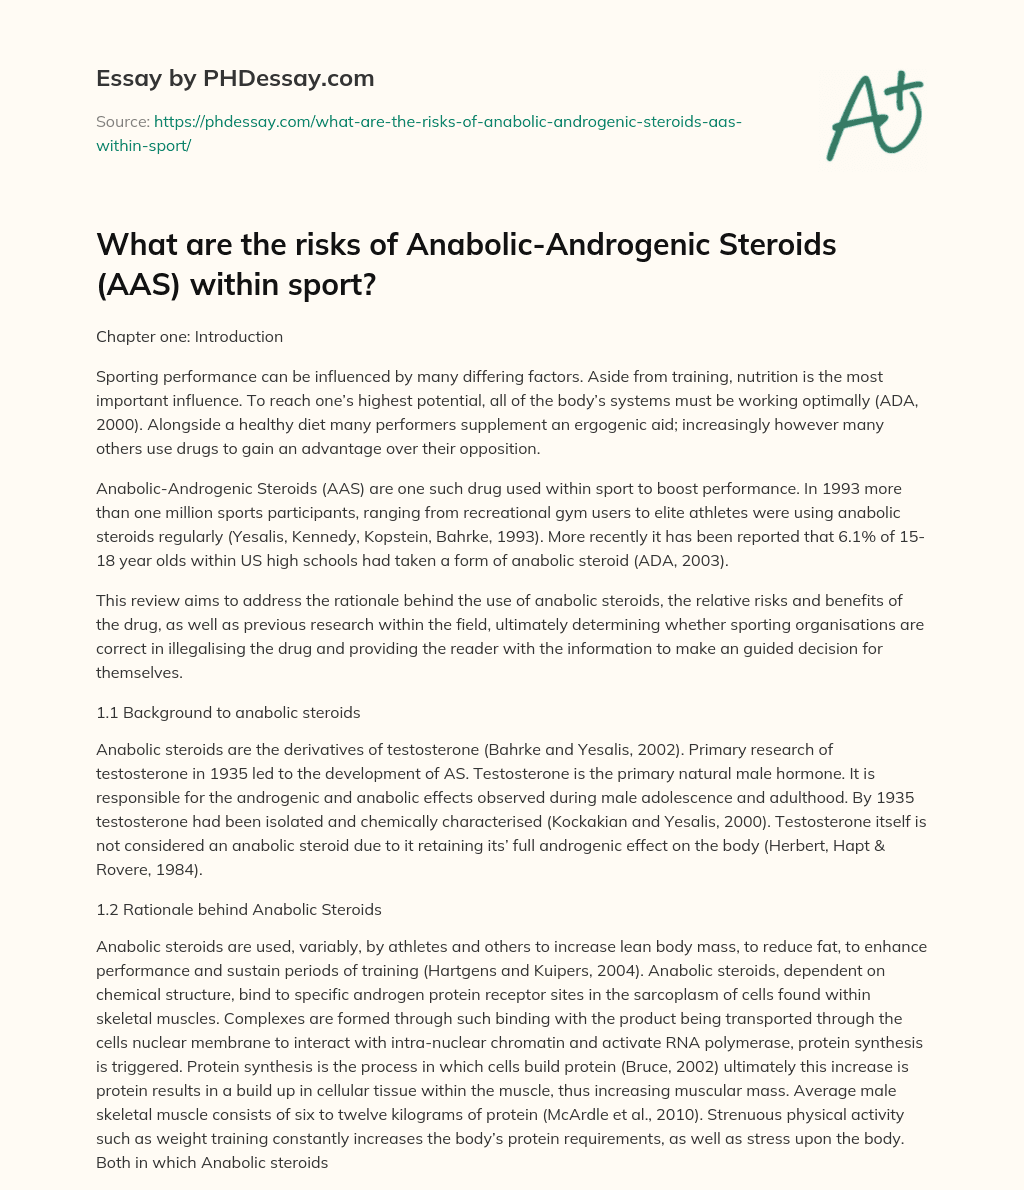 What are the risks of Anabolic-Androgenic Steroids (AAS) within sport? essay